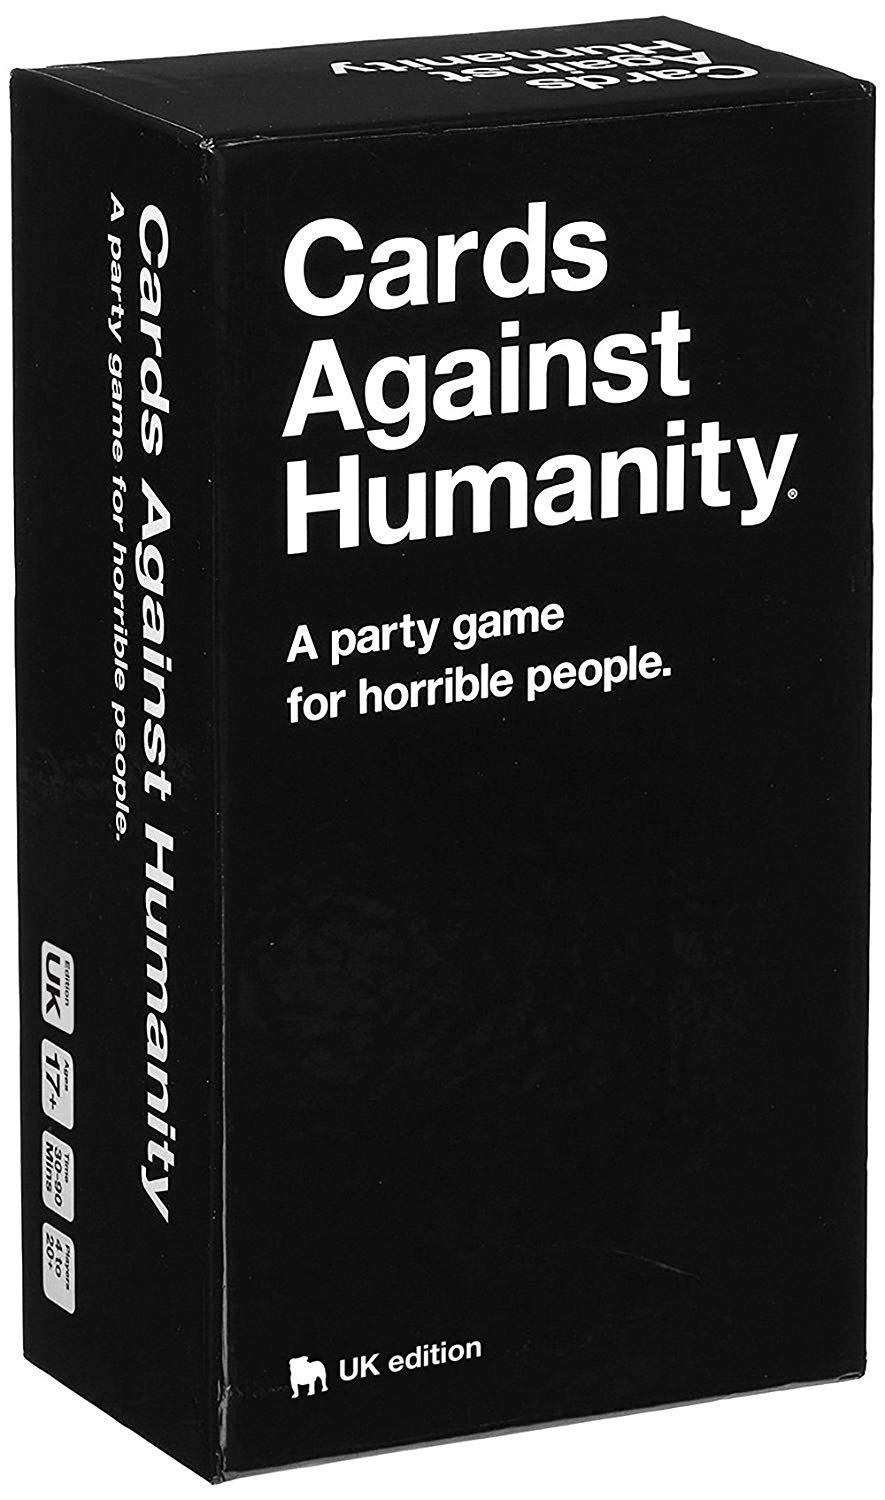 Kids Mandi Cards Against Humanity - Fun party game for kids